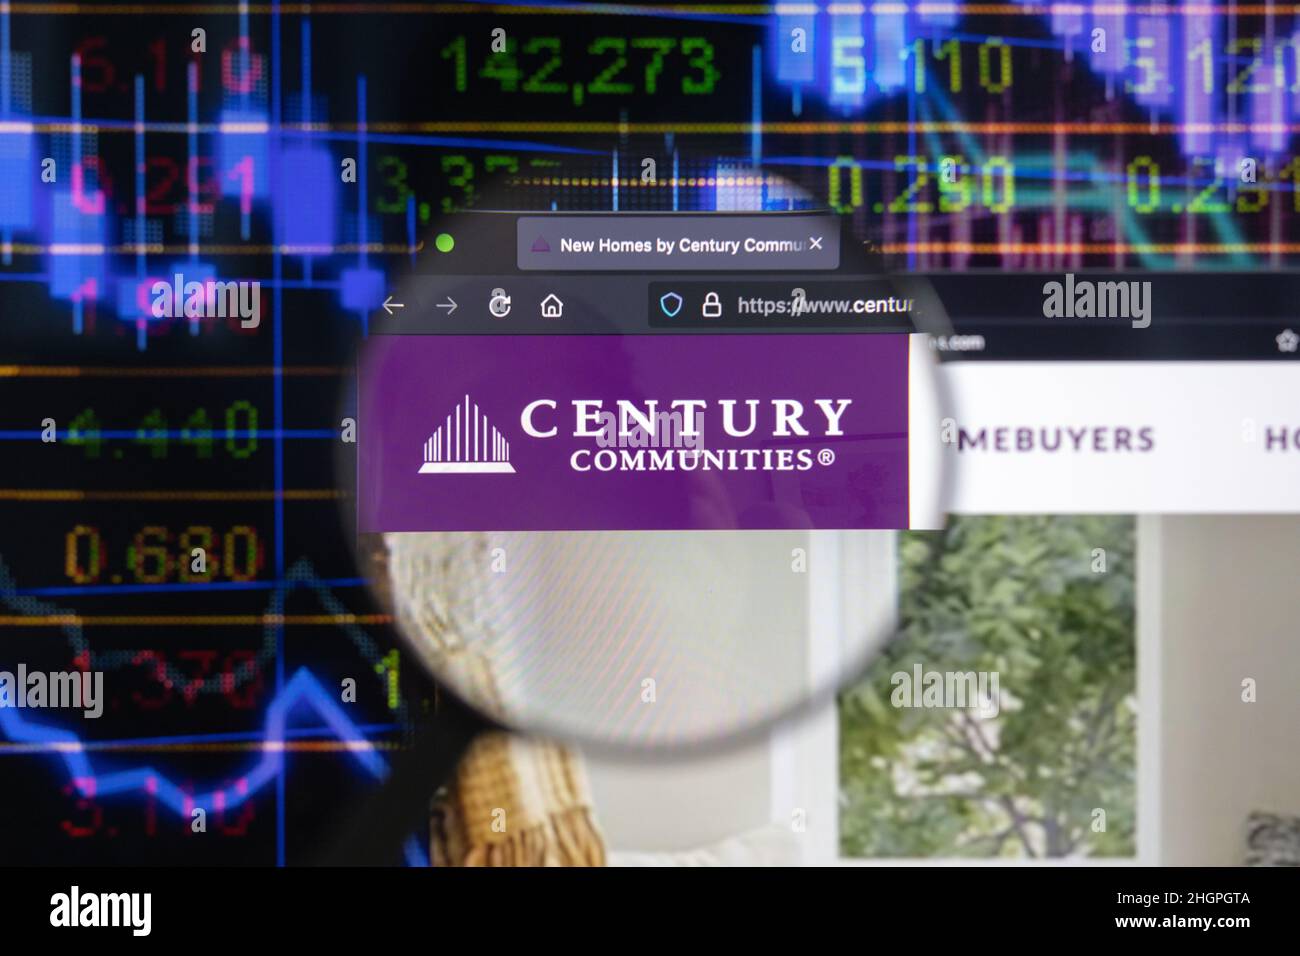 Century Communities company logo on a website with blurry stock market developments in the background, seen on a computer screen Stock Photo